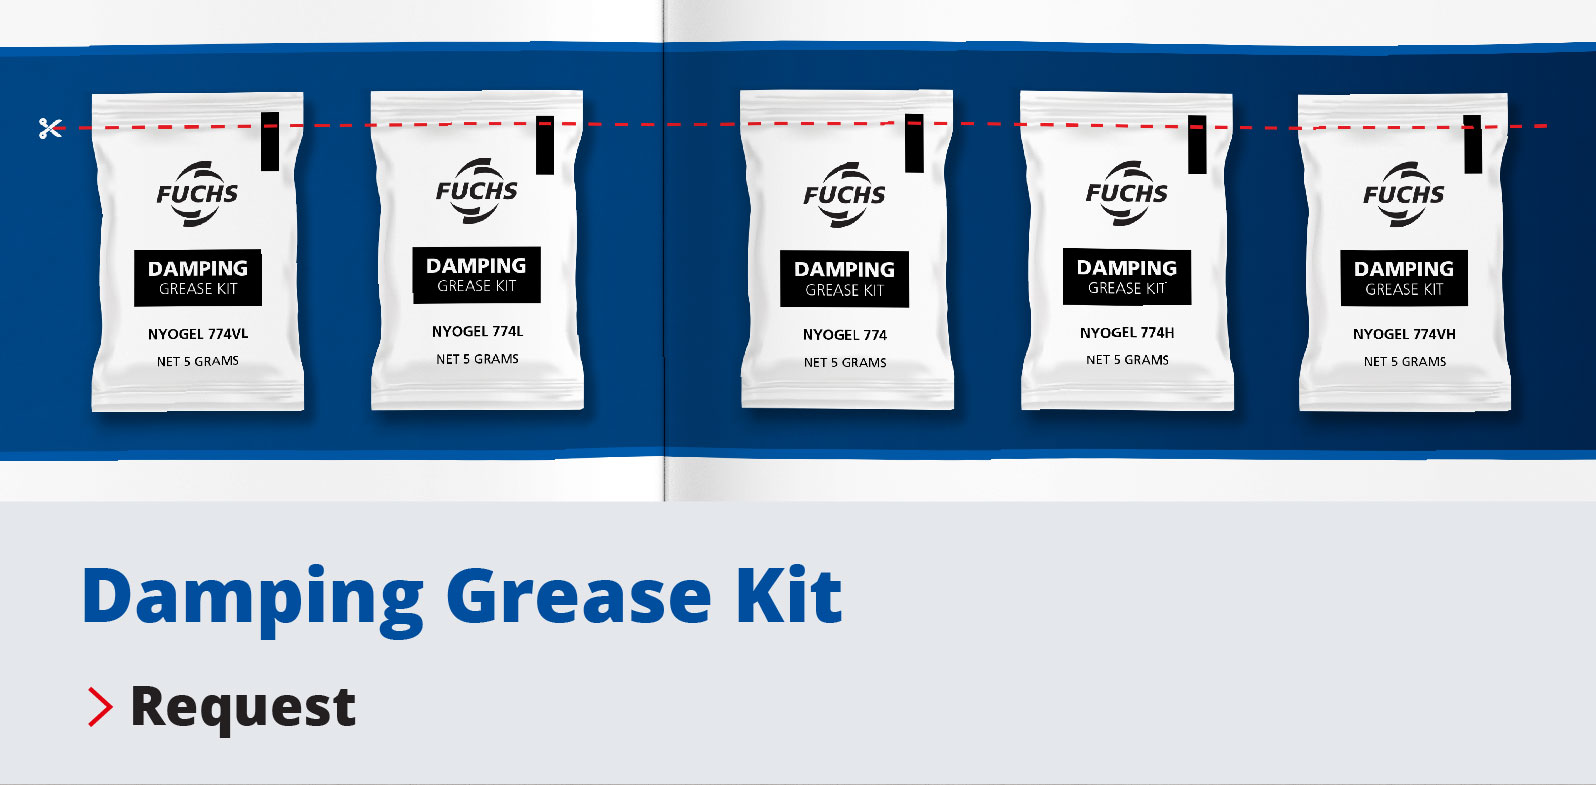 Damping Grease Kit Request